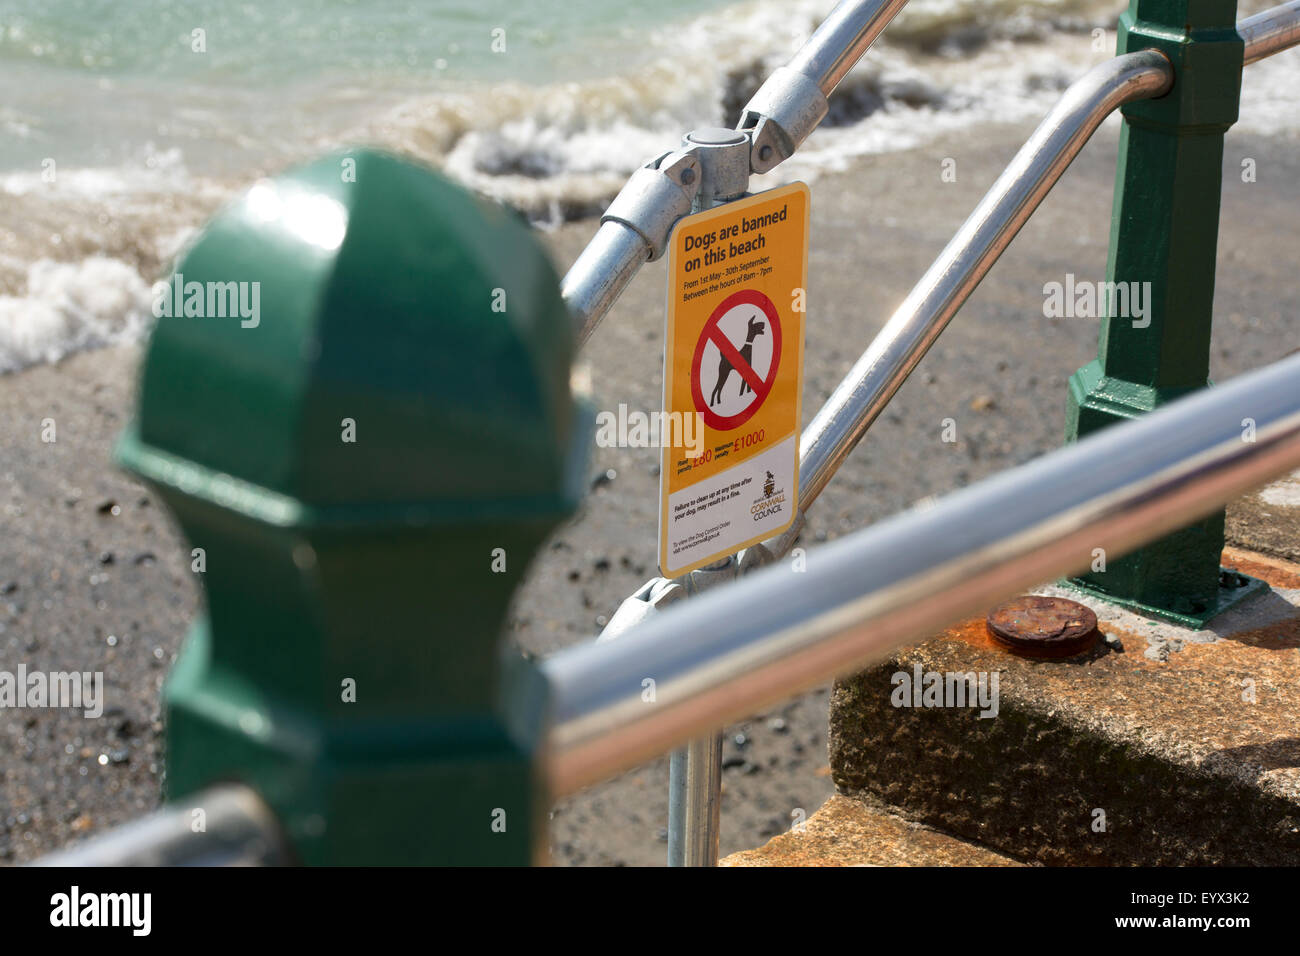 Dogs are Banned on this Beach Stock Photo